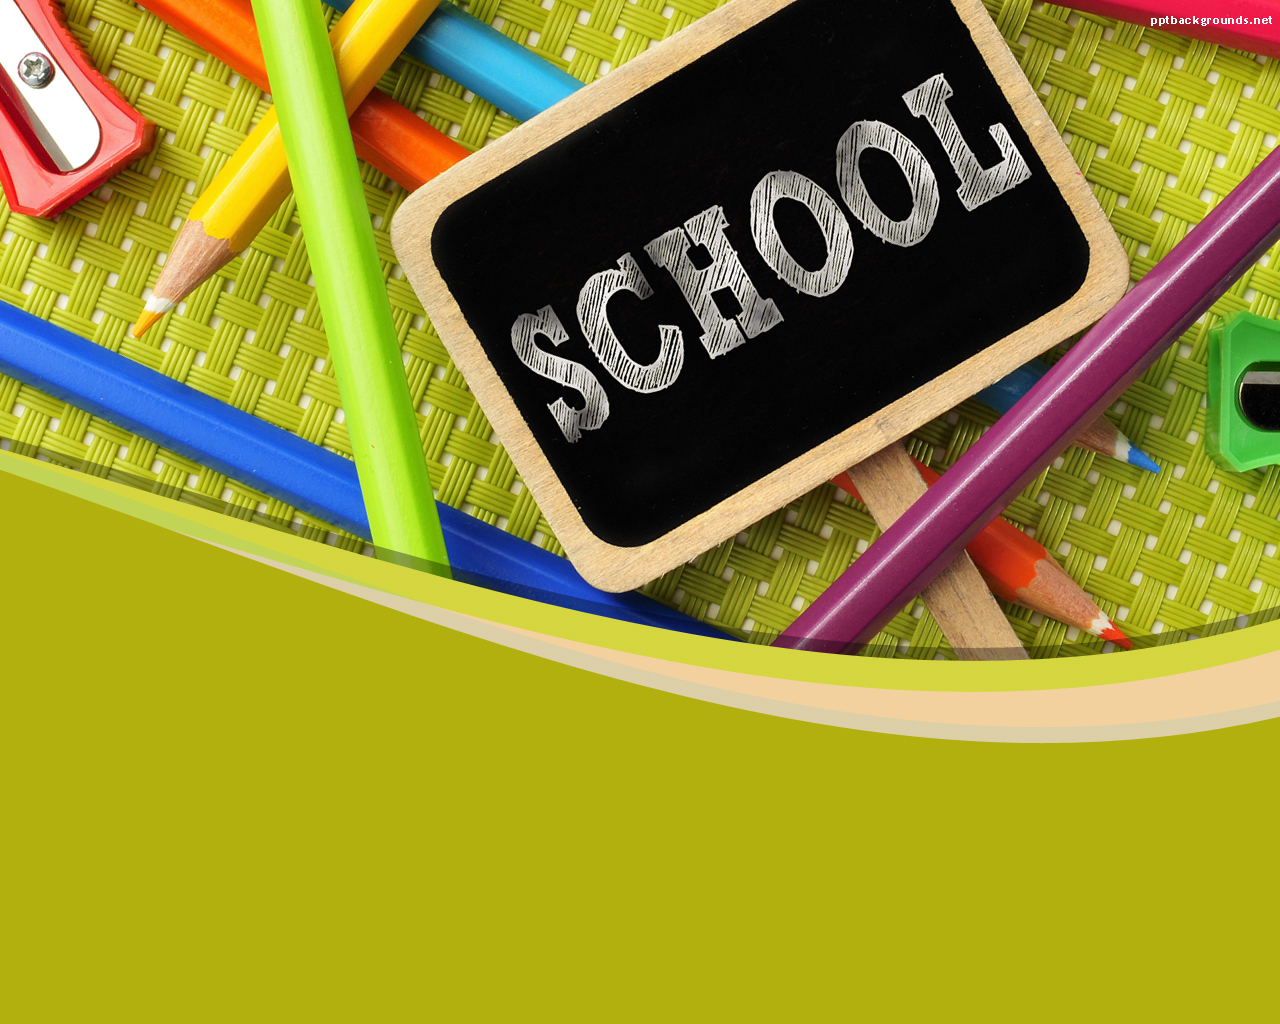 [48+] Free School Backgrounds and Wallpapers on WallpaperSafari1280 x 1024